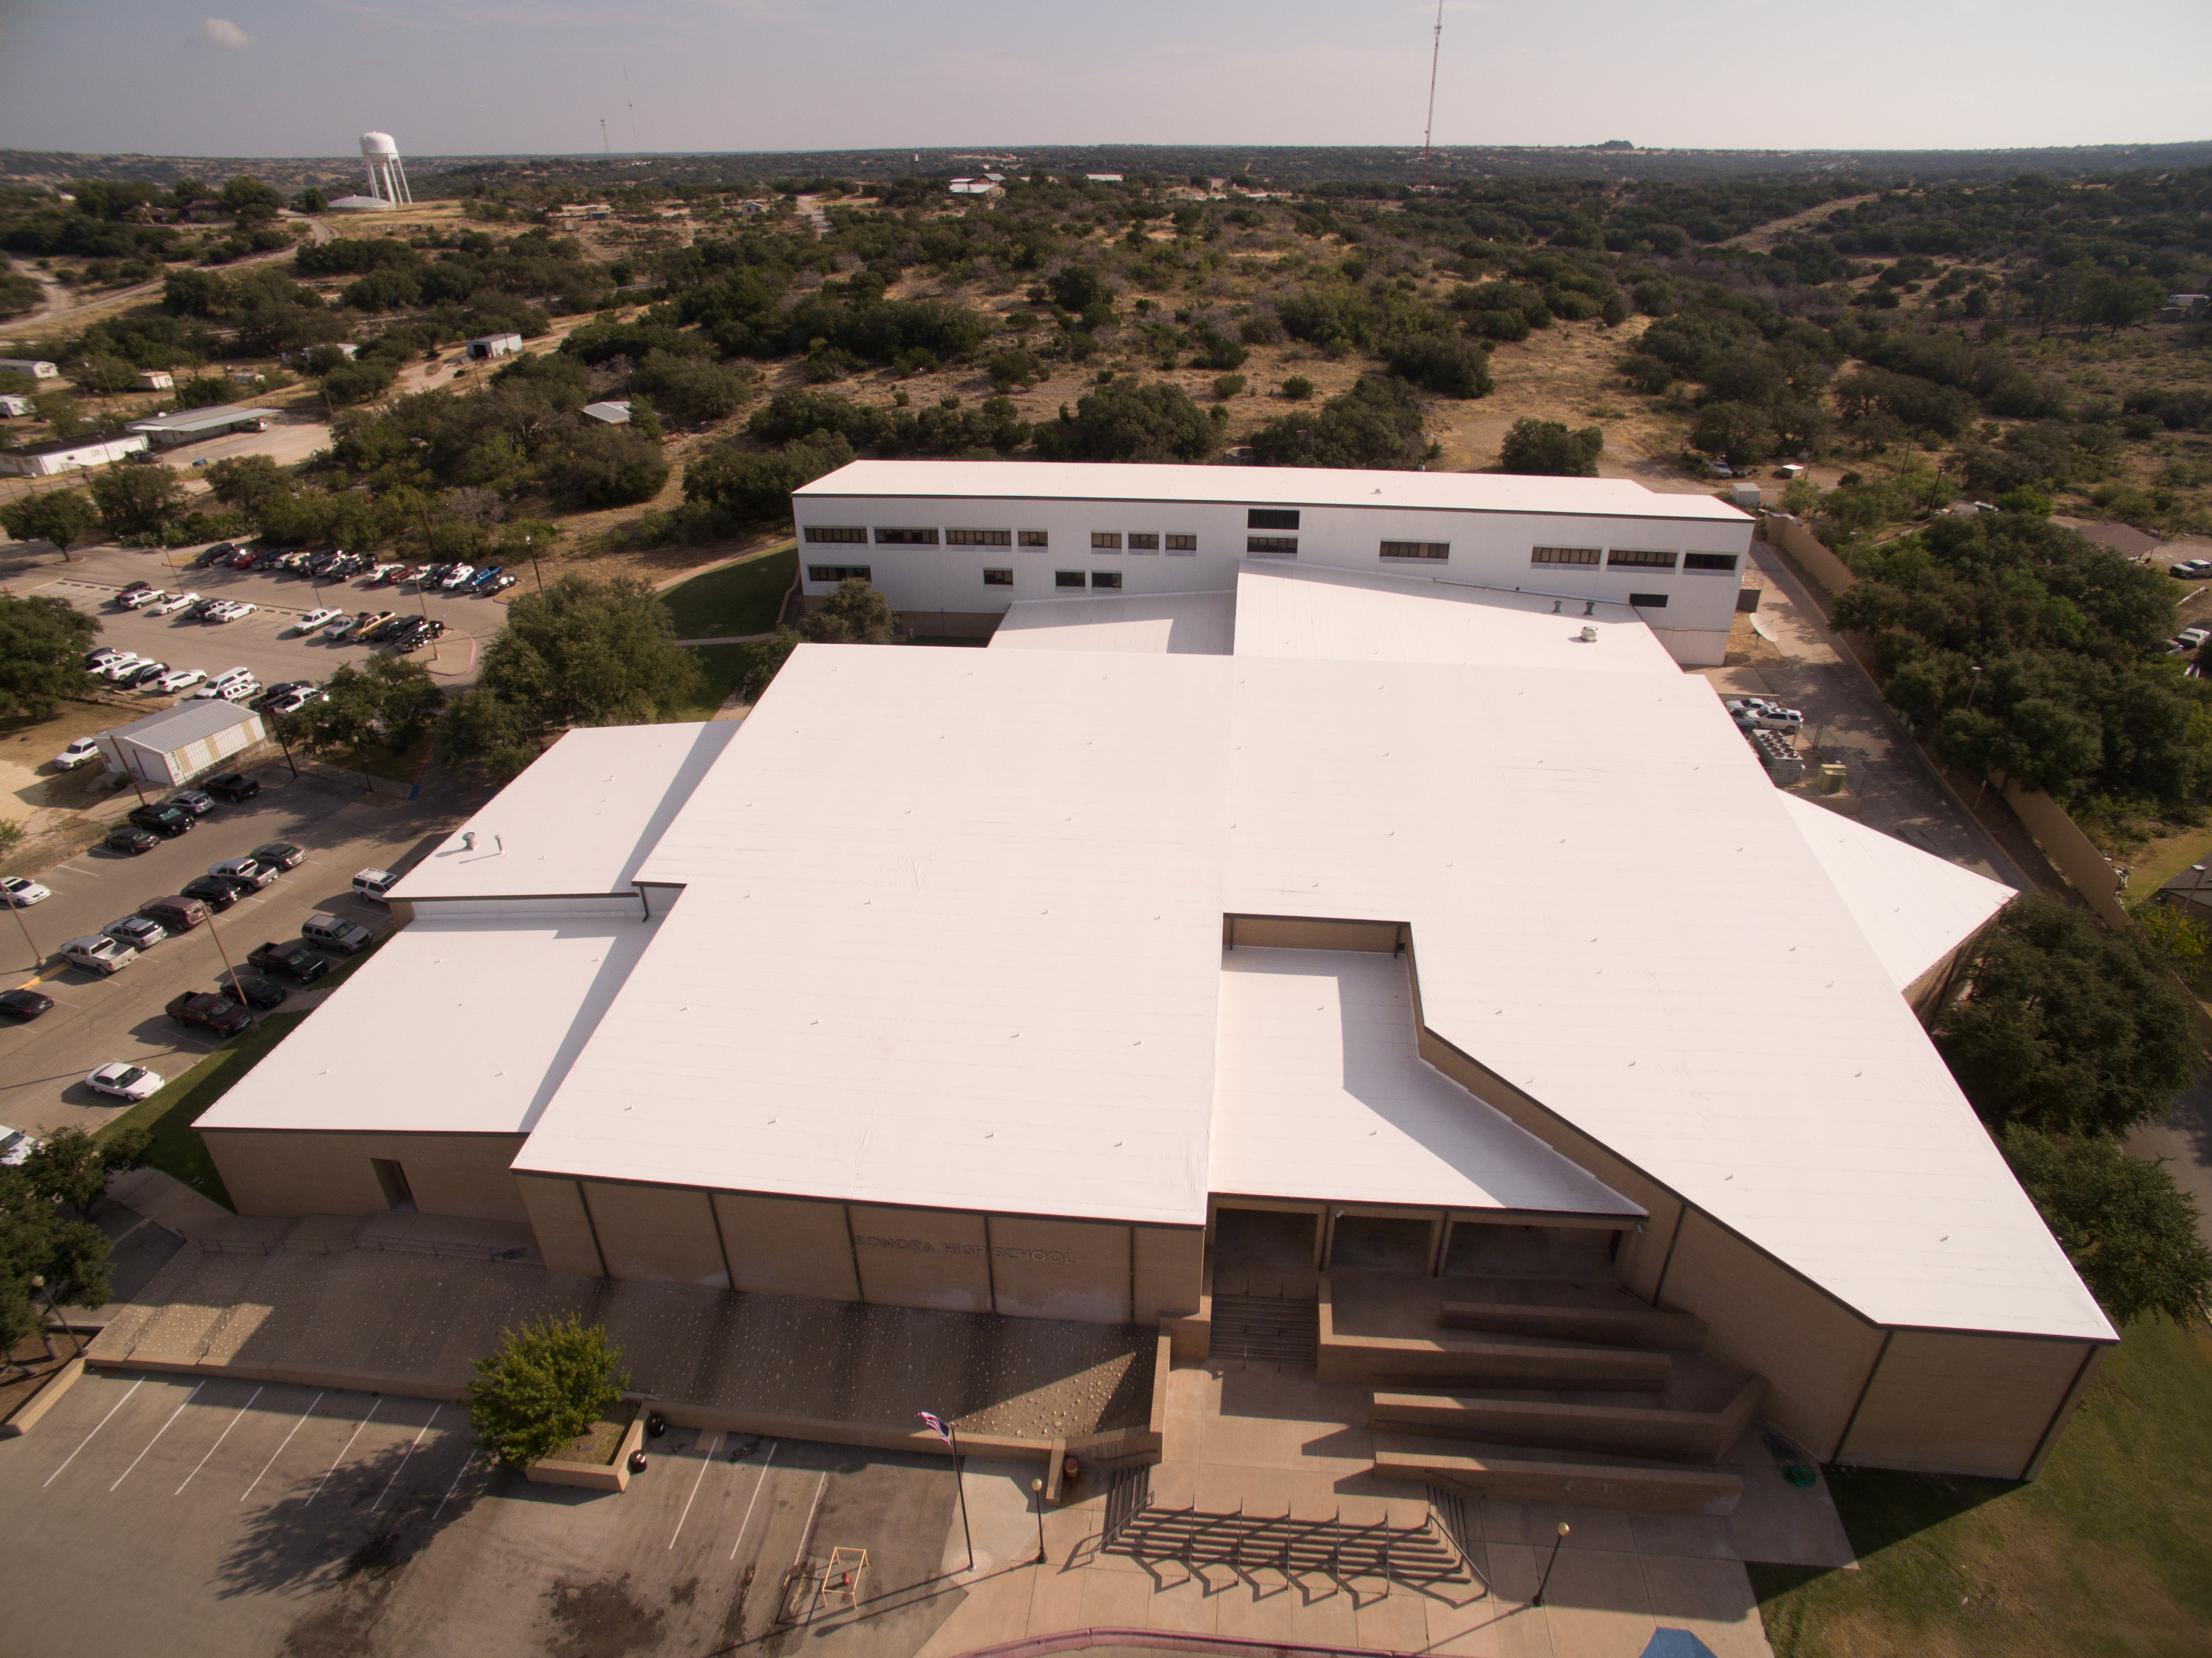 There is a long-debunked perception that vinyl is harmful to building occupants. It is not. And its clean installation is considered safer than roofing systems involving tar and hot pots. A vinyl roof was installed on Tulia High School in Tulia, Texas.